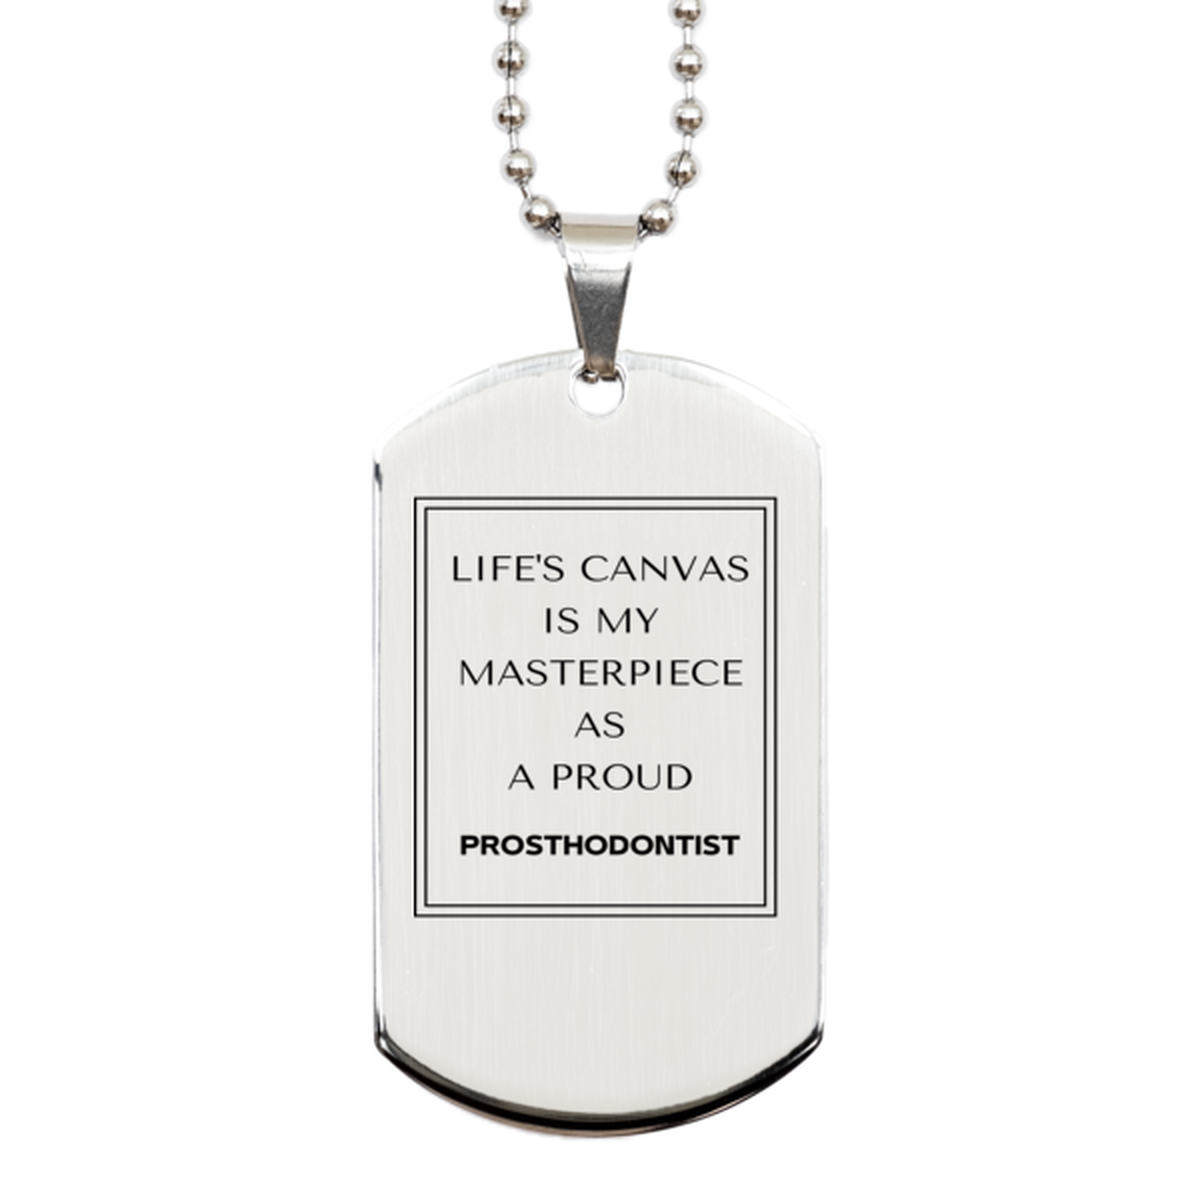 Proud Prosthodontist Gifts, Life's canvas is my masterpiece, Epic Birthday Christmas Unique Silver Dog Tag For Prosthodontist, Coworkers, Men, Women, Friends